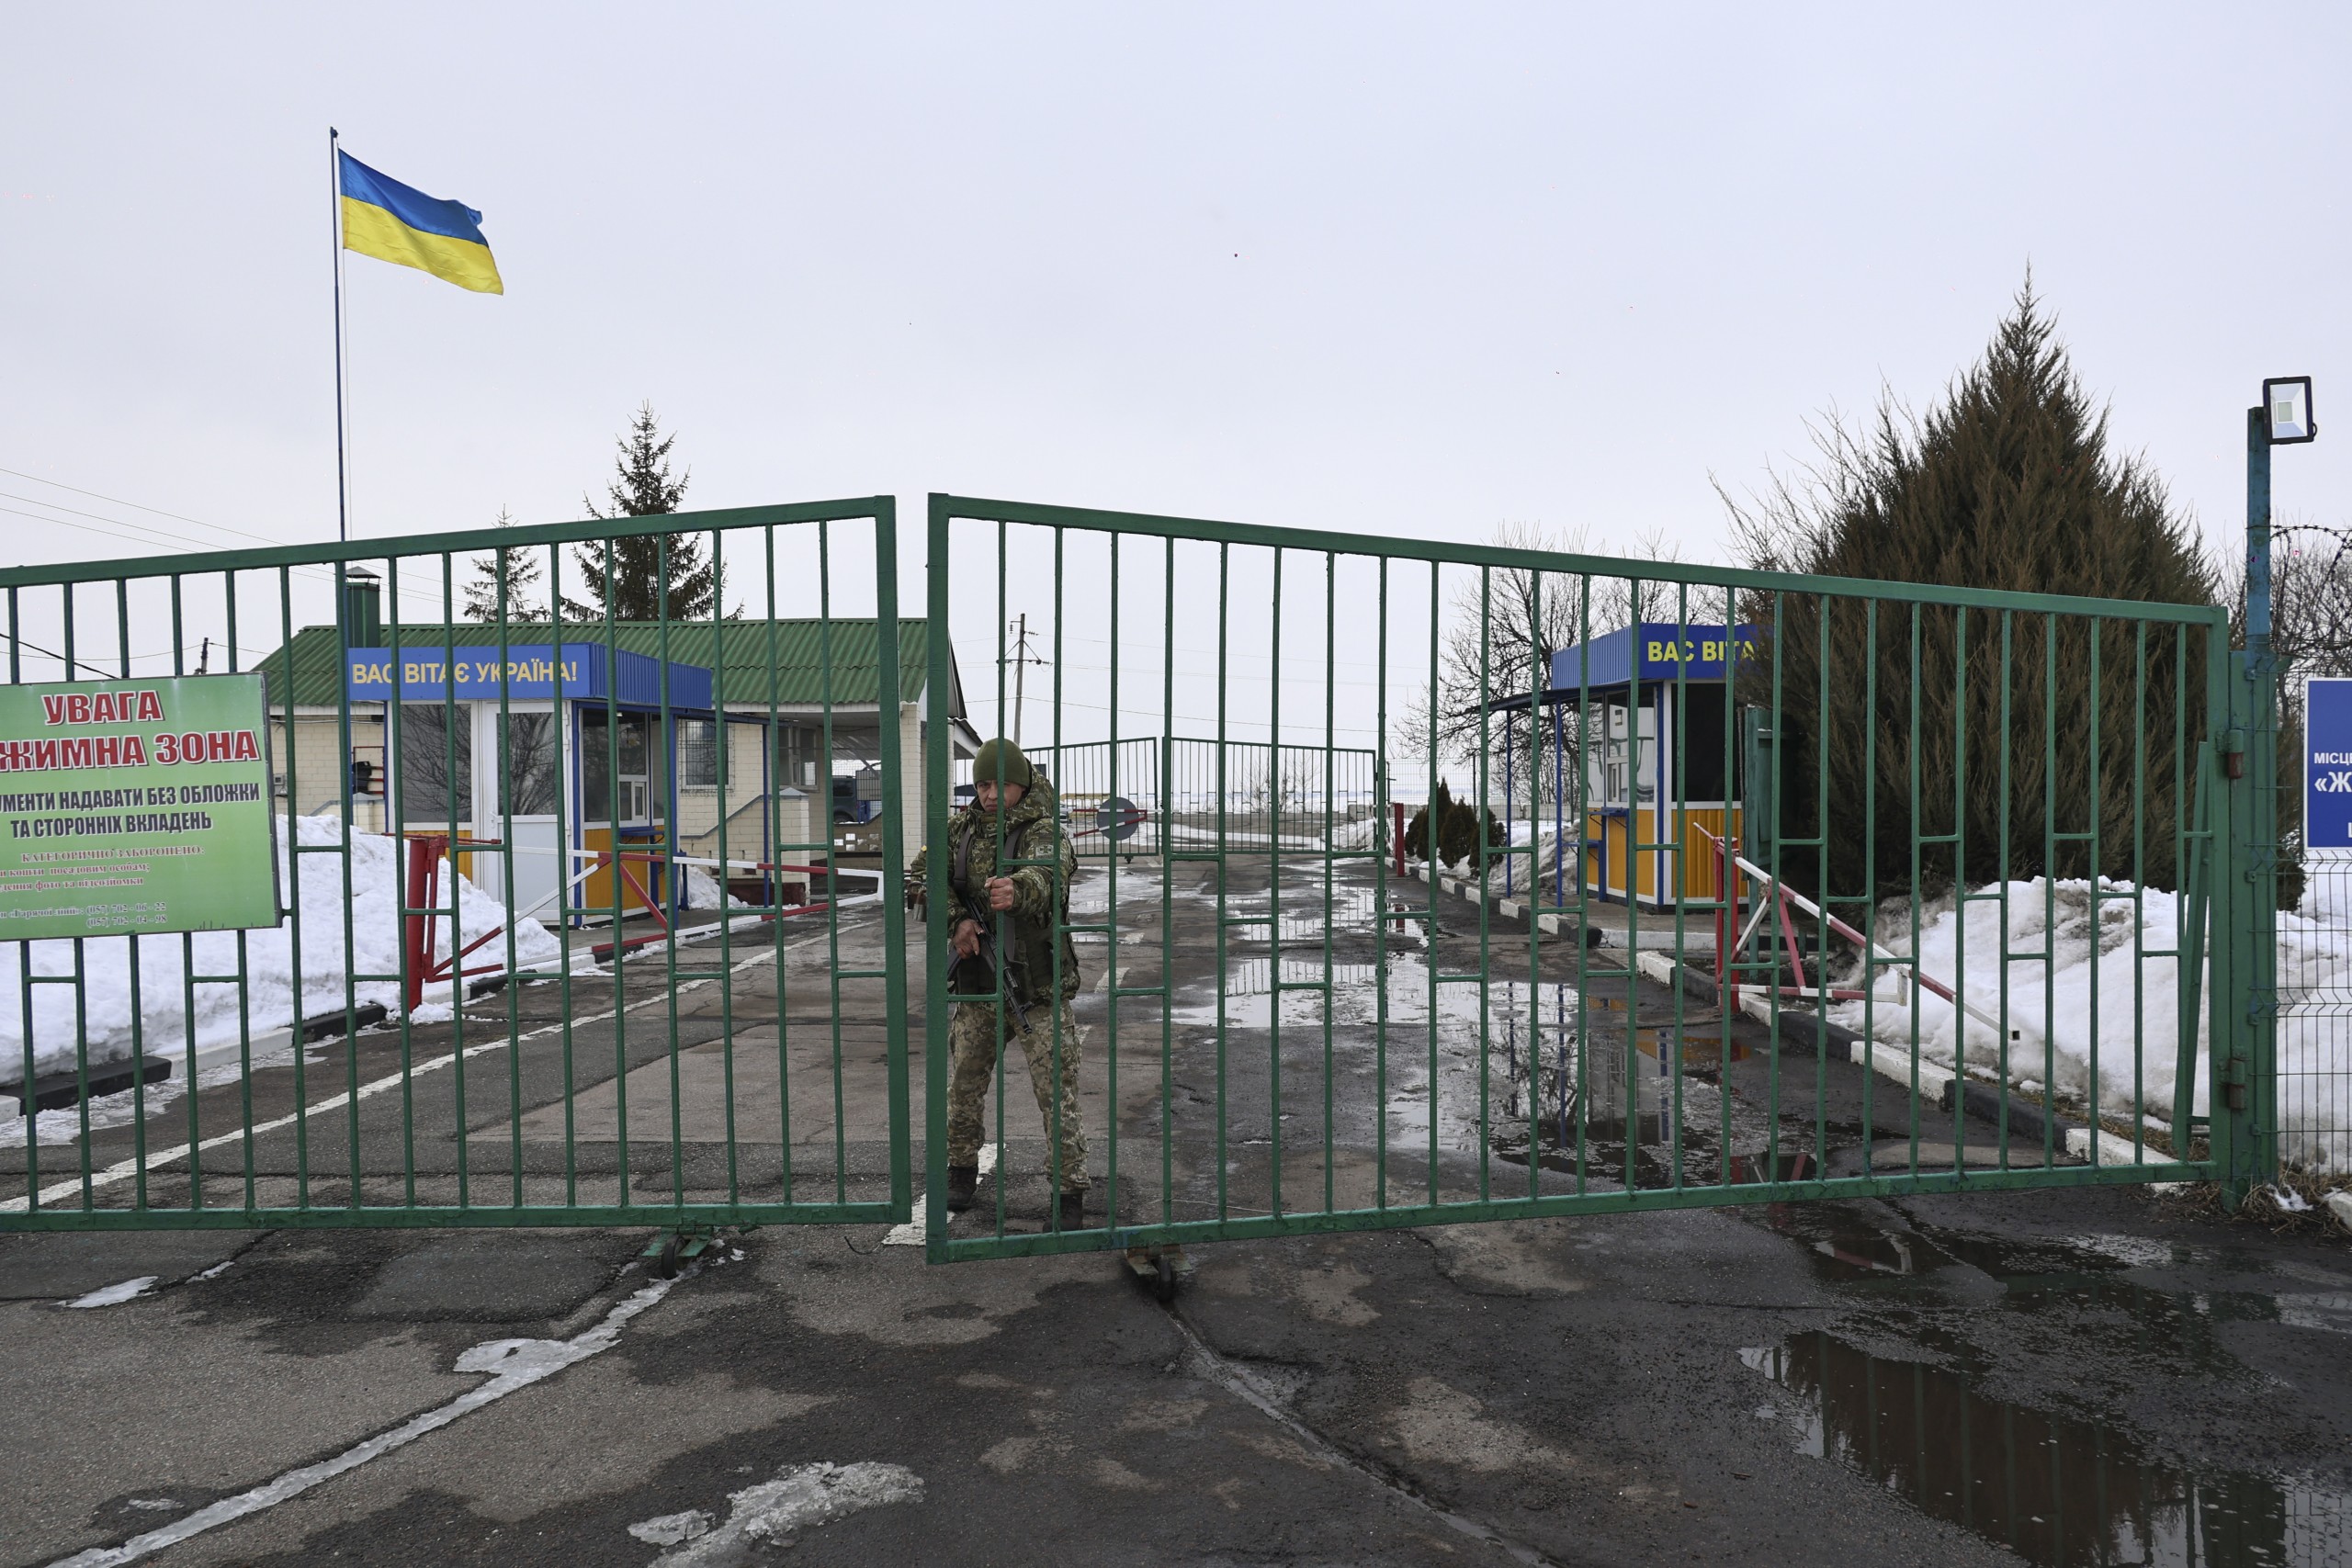 epa09763309 General view of the Goptivka border crossing between Ukraine and Russia not far from Eastern Ukrainian city of Kharkiv, 16 February 2022 amid tensions on the Ukrainian-Russian border.  EPA/SERGEY KOZLOV